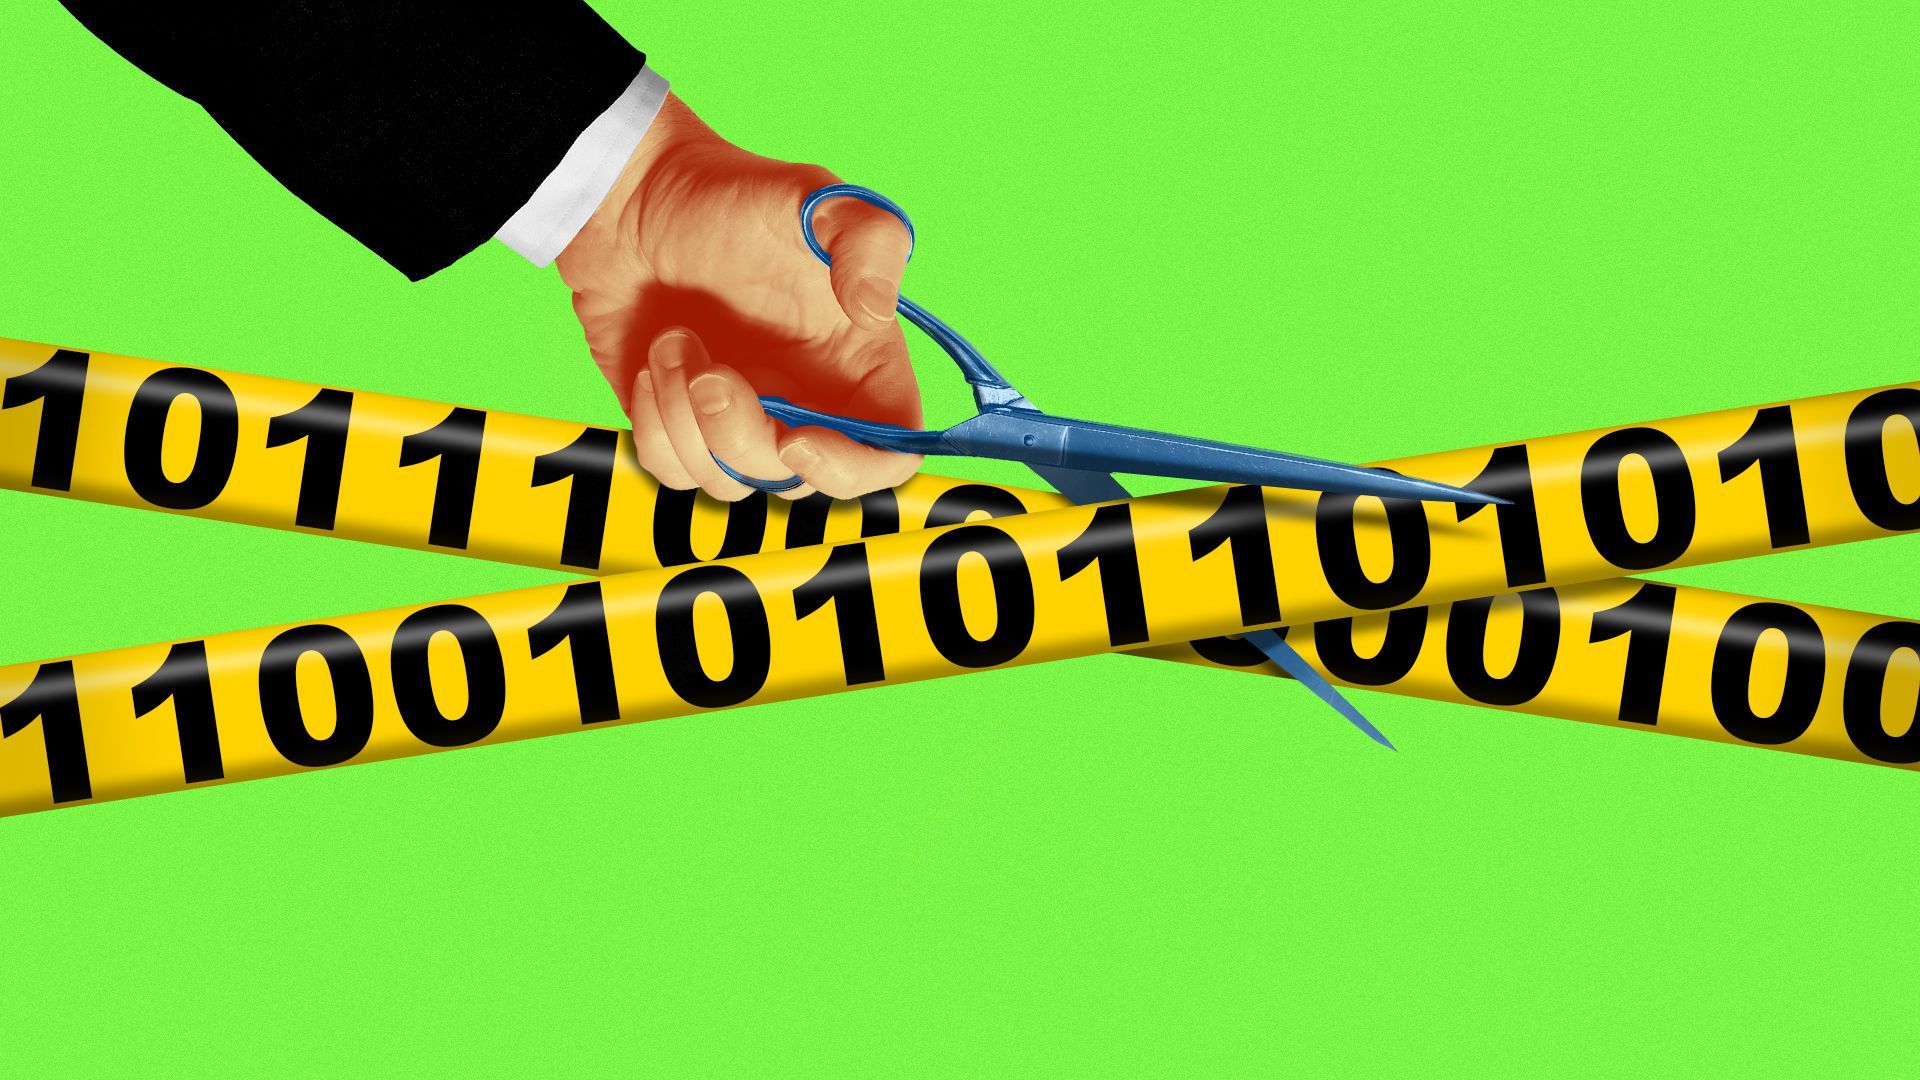 Illustration of a hand with scissors cutting through caution tape featuring binary code